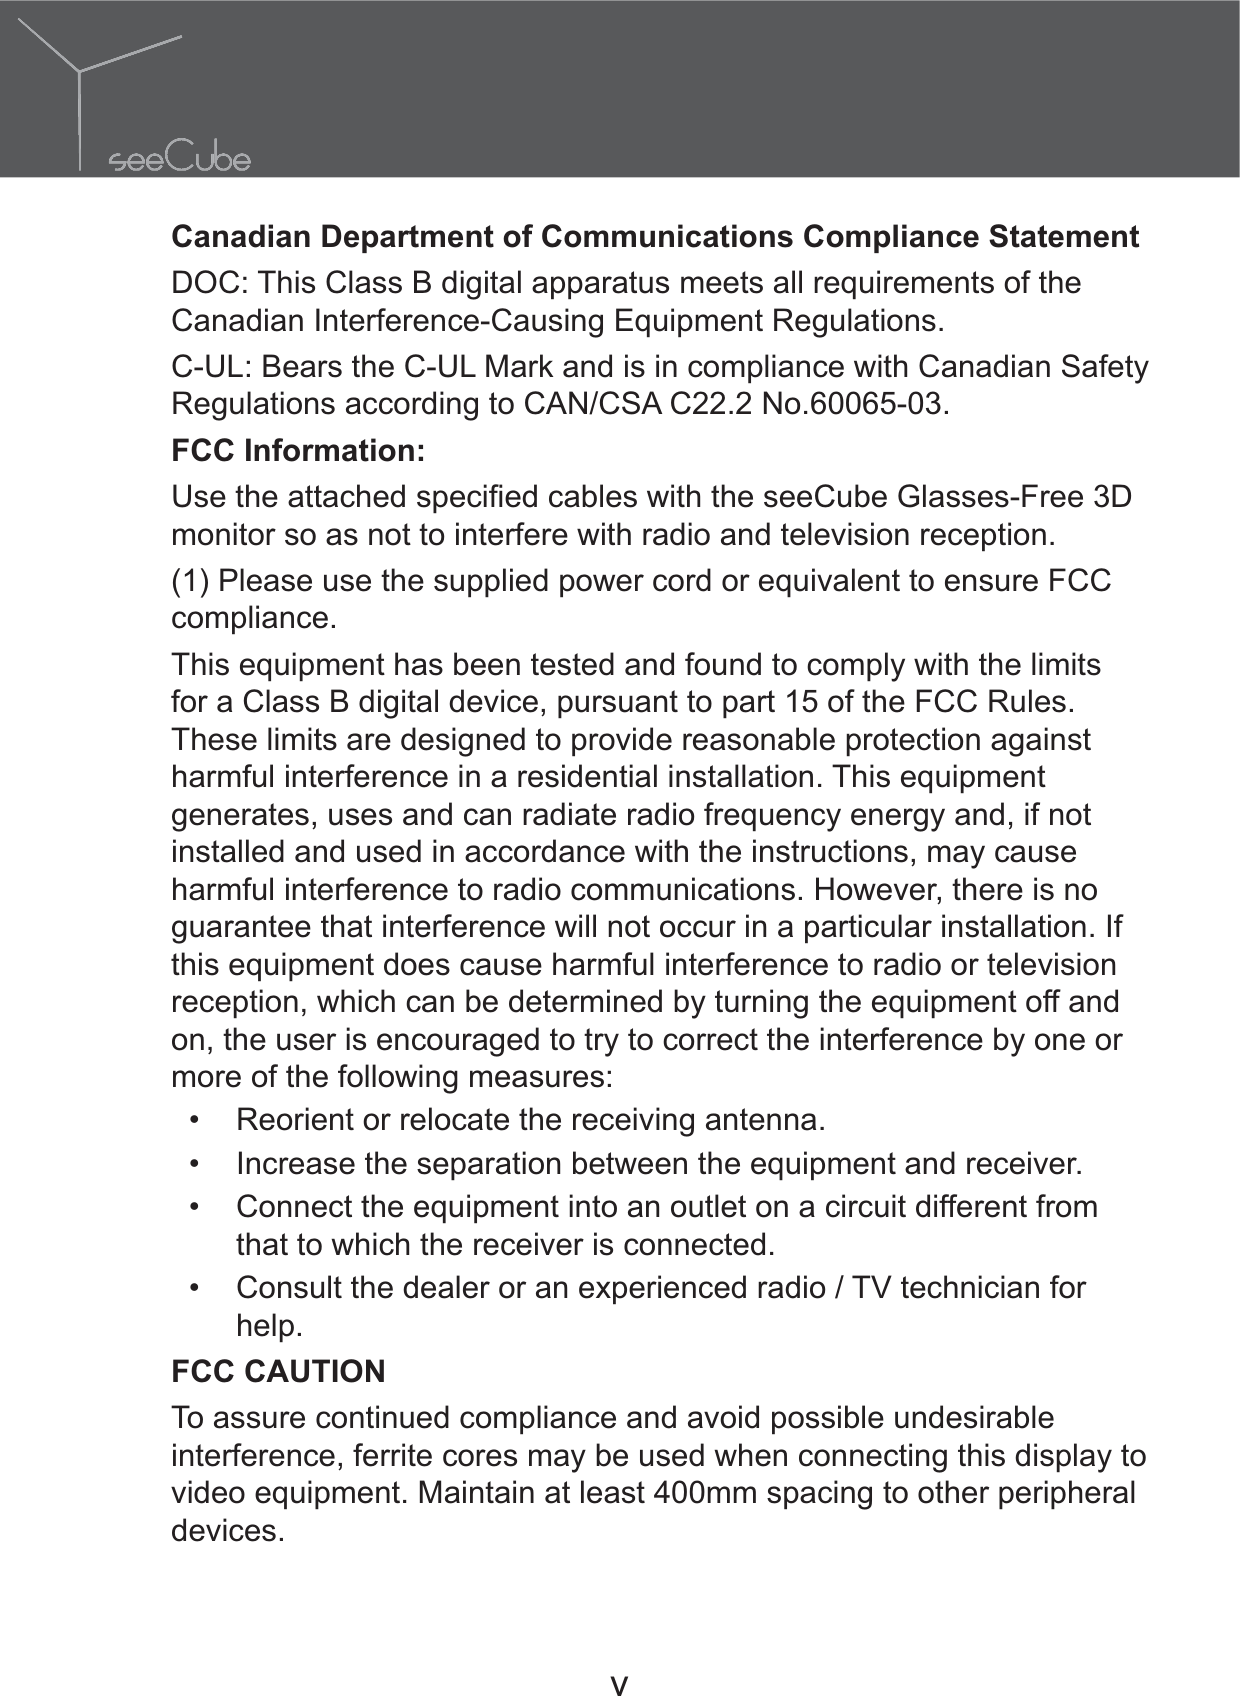 v Canadian Department of Communications Compliance StatementDOC: This Class B digital apparatus meets all requirements of the Canadian Interference-Causing Equipment Regulations.C-UL: Bears the C-UL Mark and is in compliance with Canadian Safety Regulations according to CAN/CSA C22.2 No.60065-03.FCC Information:monitor so as not to interfere with radio and television reception.(1) Please use the supplied power cord or equivalent to ensure FCC compliance.This equipment has been tested and found to comply with the limits for a Class B digital device, pursuant to part 15 of the FCC Rules. These limits are designed to provide reasonable protection against harmful interference in a residential installation. This equipment generates, uses and can radiate radio frequency energy and, if not installed and used in accordance with the instructions, may cause harmful interference to radio communications. However, there is no guarantee that interference will not occur in a particular installation. If this equipment does cause harmful interference to radio or television reception, which can be determined by turning the equipment off and on, the user is encouraged to try to correct the interference by one or more of the following measures: Reorient or relocate the receiving antenna. Increase the separation between the equipment and receiver. Connect the equipment into an outlet on a circuit different from that to which the receiver is connected. Consult the dealer or an experienced radio / TV technician for help.FCC CAUTIONTo assure continued compliance and avoid possible undesirable interference, ferrite cores may be used when connecting this display to video equipment. Maintain at least 400mm spacing to other peripheral devices.